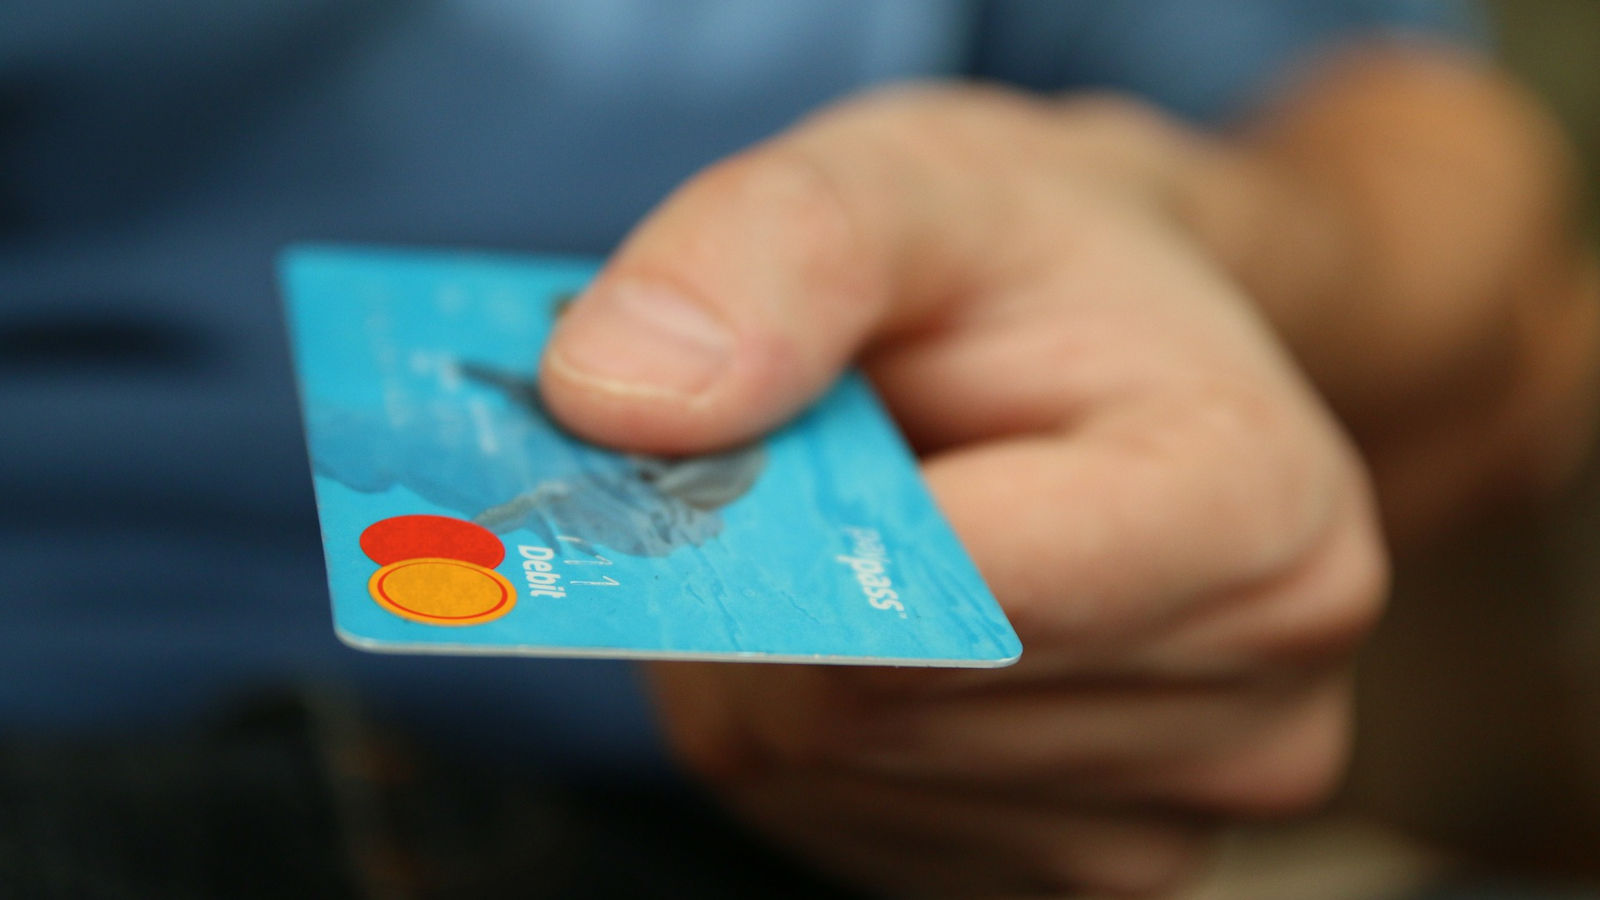 Hackers inject credit card stealers into payment processing modules